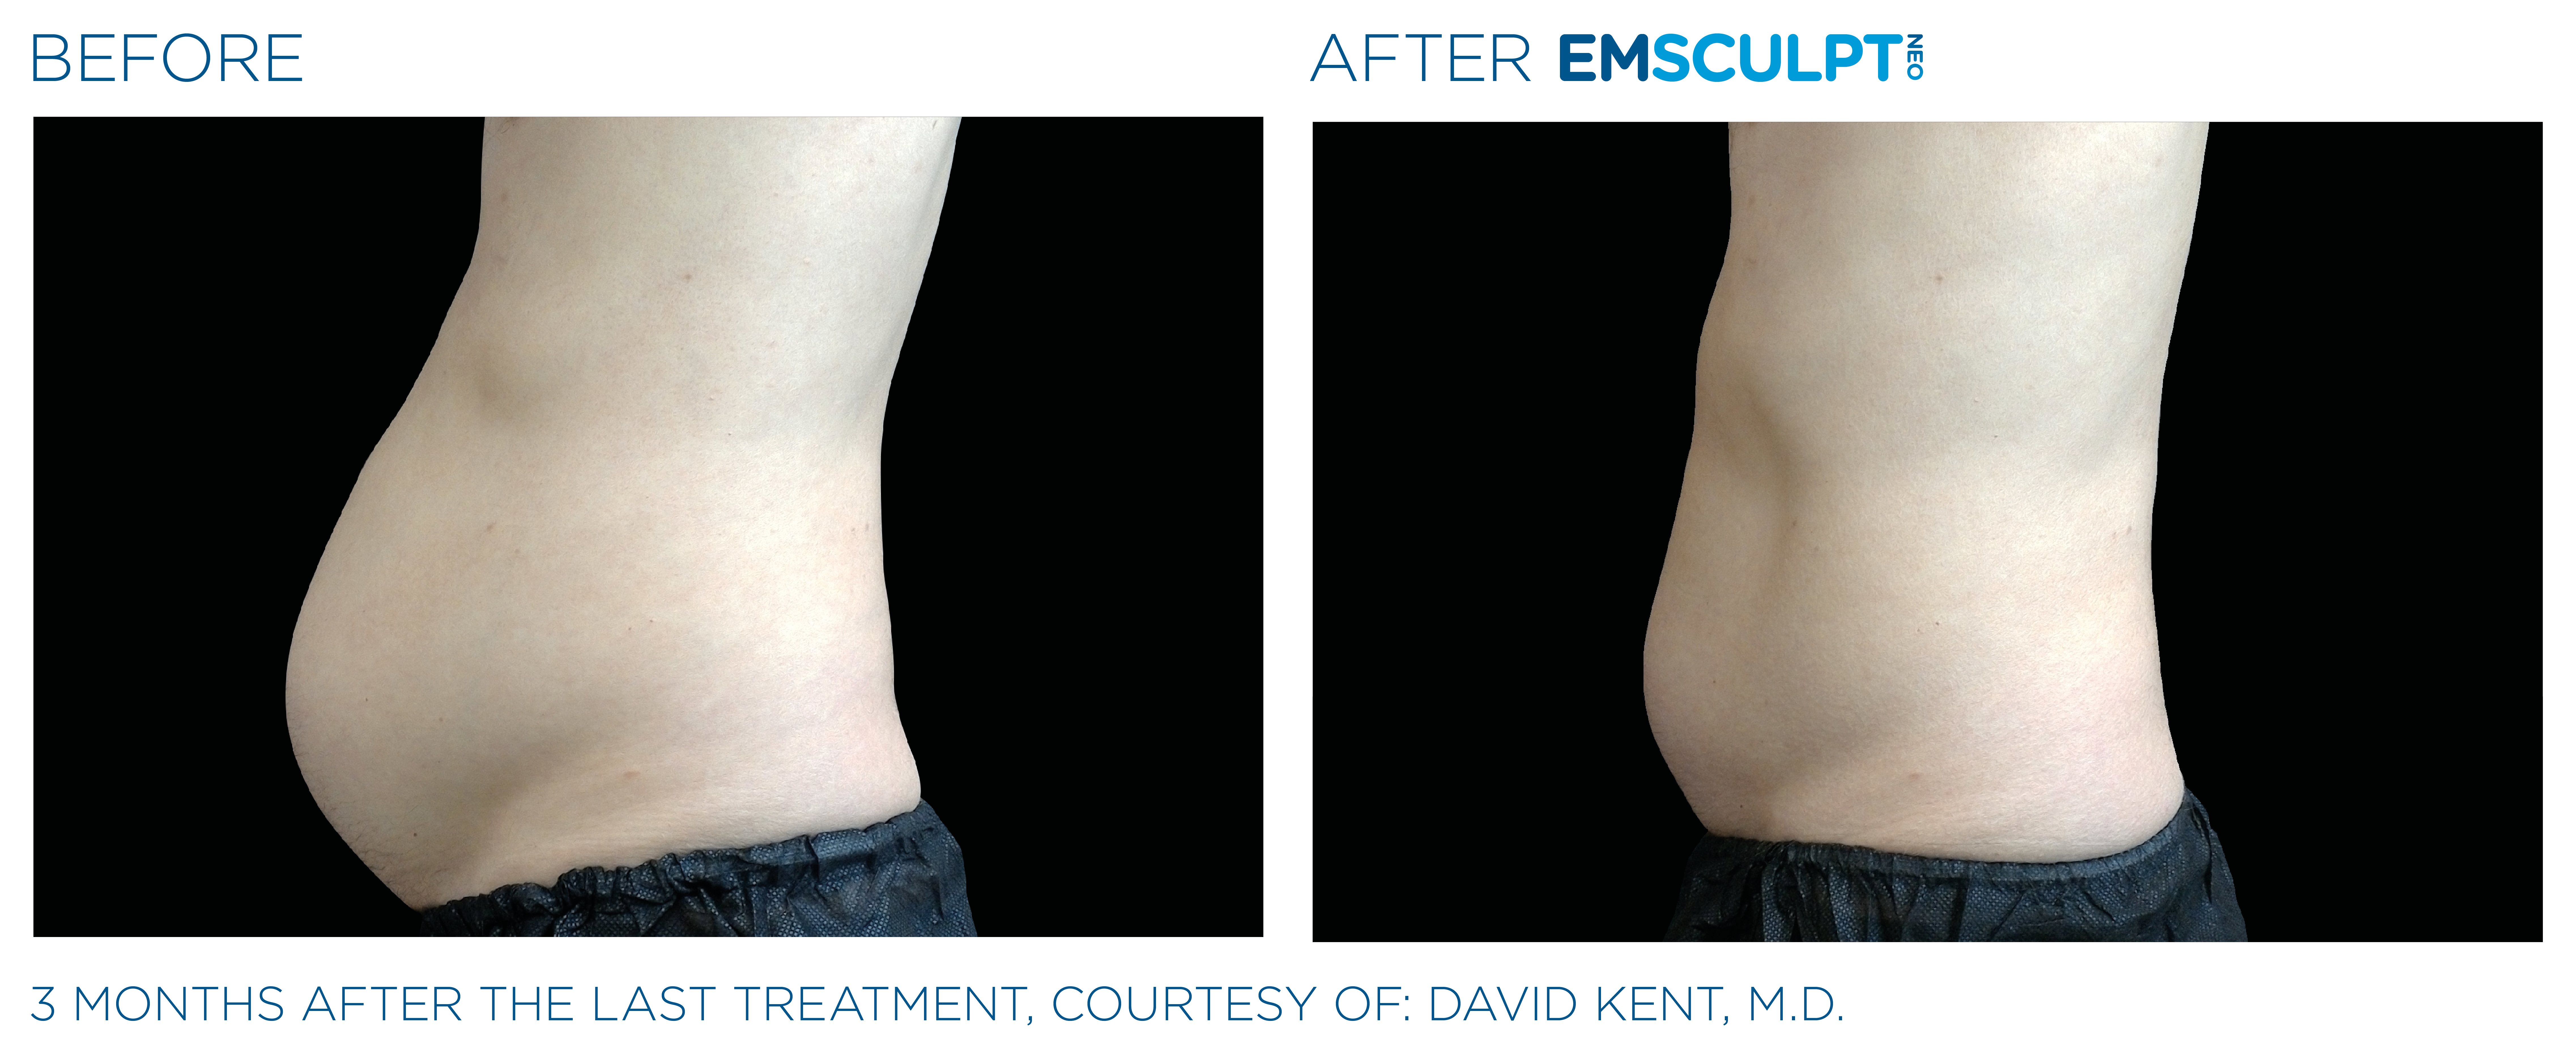 Male Abdomen Before and After Emsculpt neo